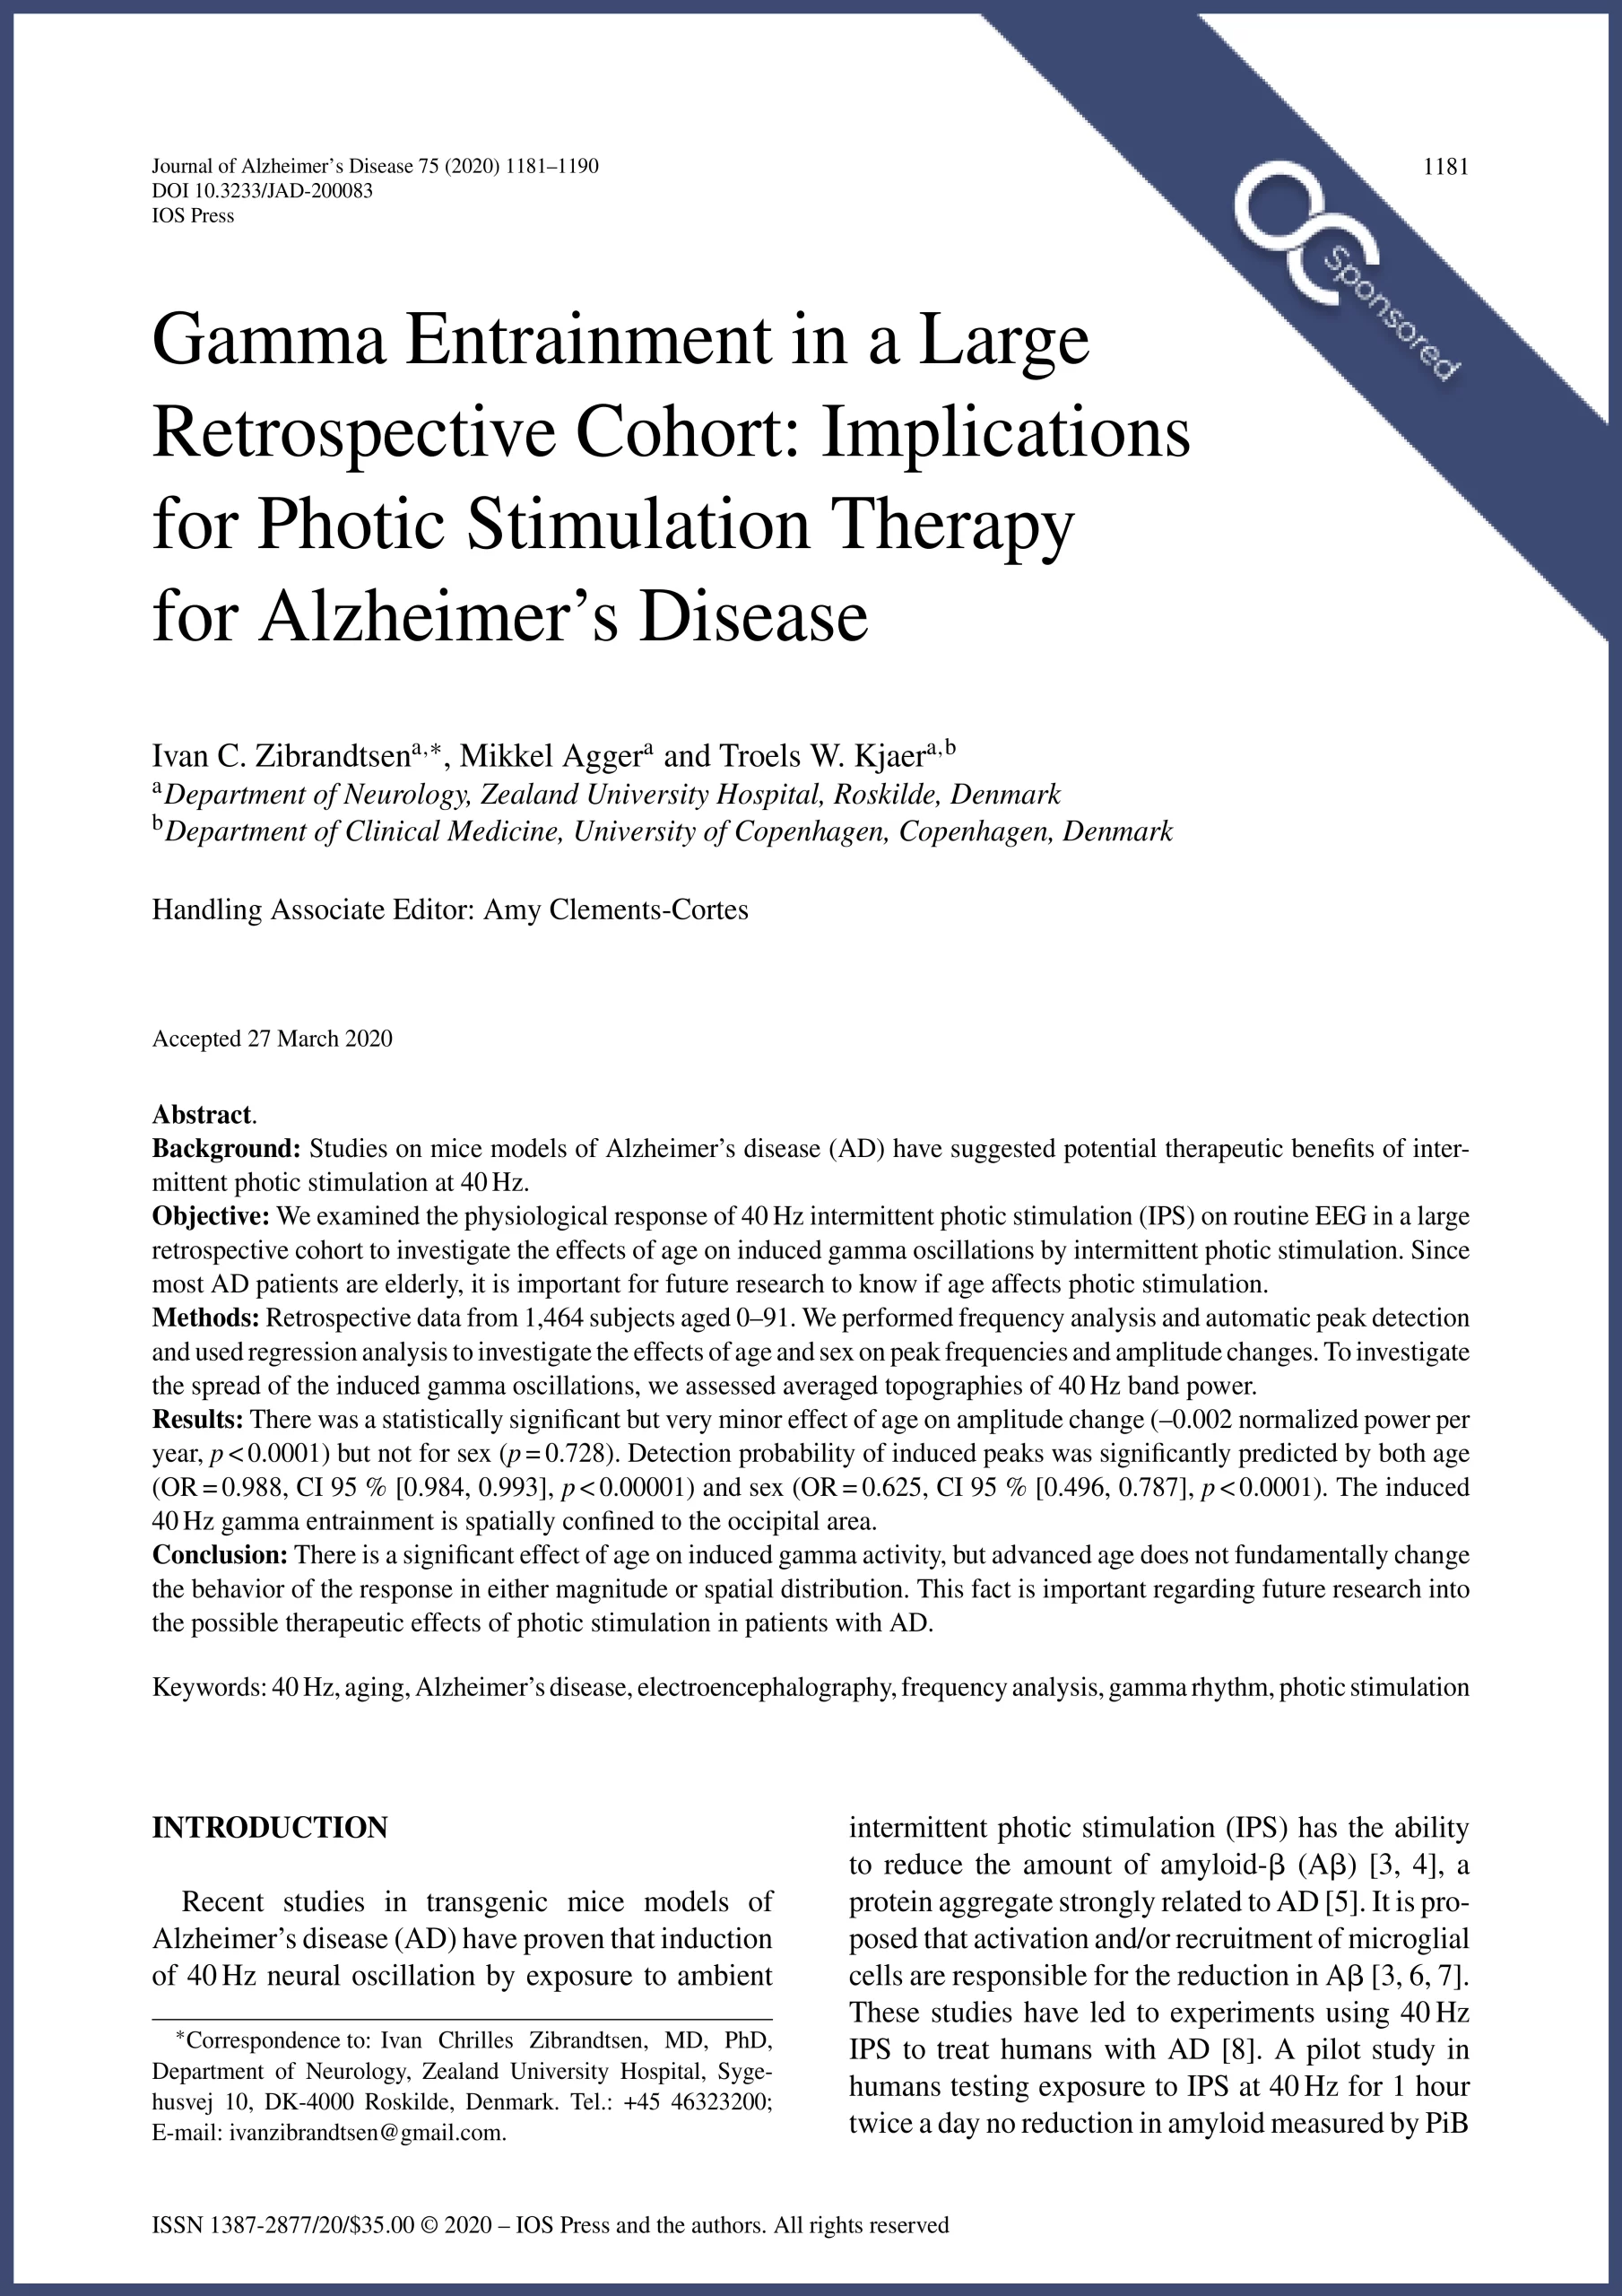 Gamma Entrainment in a Large Retrospective Cohort: Implications for Photic Stimulation Therapy for Alzheimer's Disease publication by Zibrandtsen, 2020 sponsored by Optoceutics